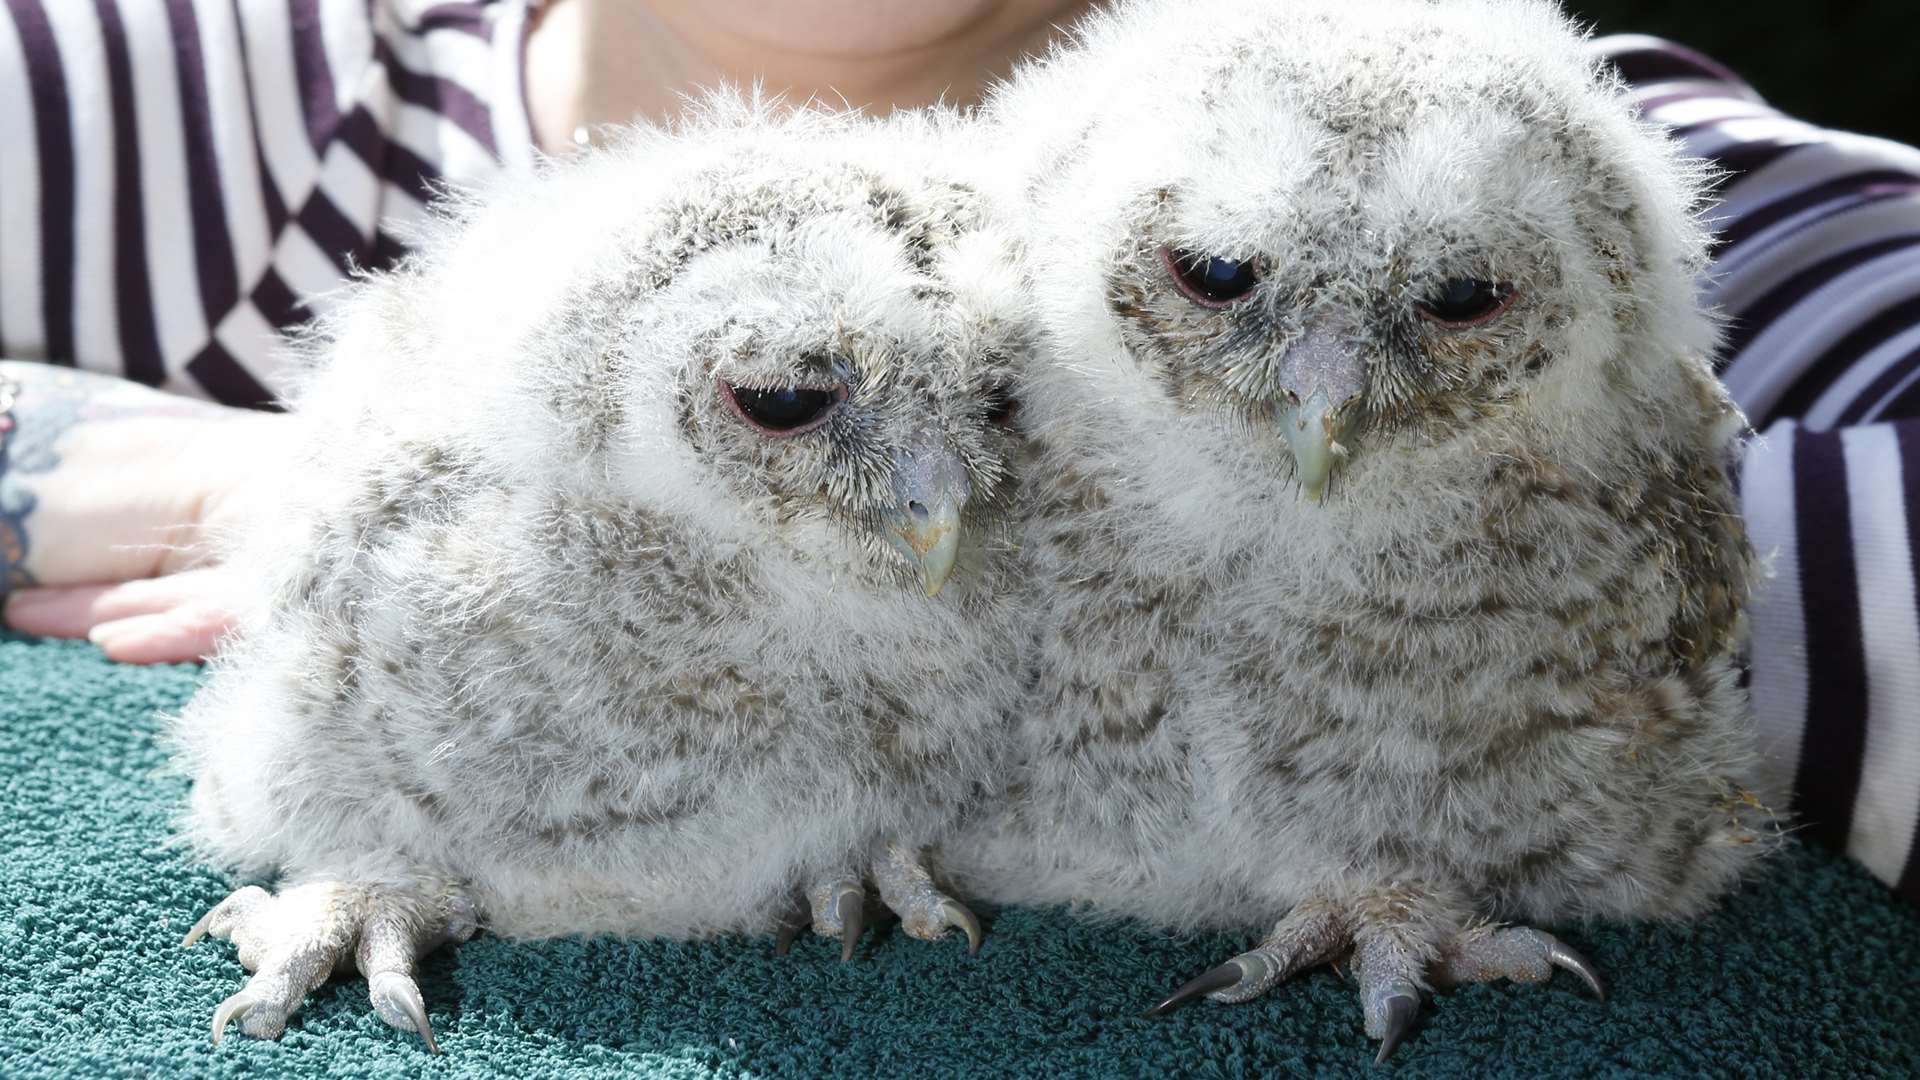 Baby tawny owls Laurel and Hardy were also rescued